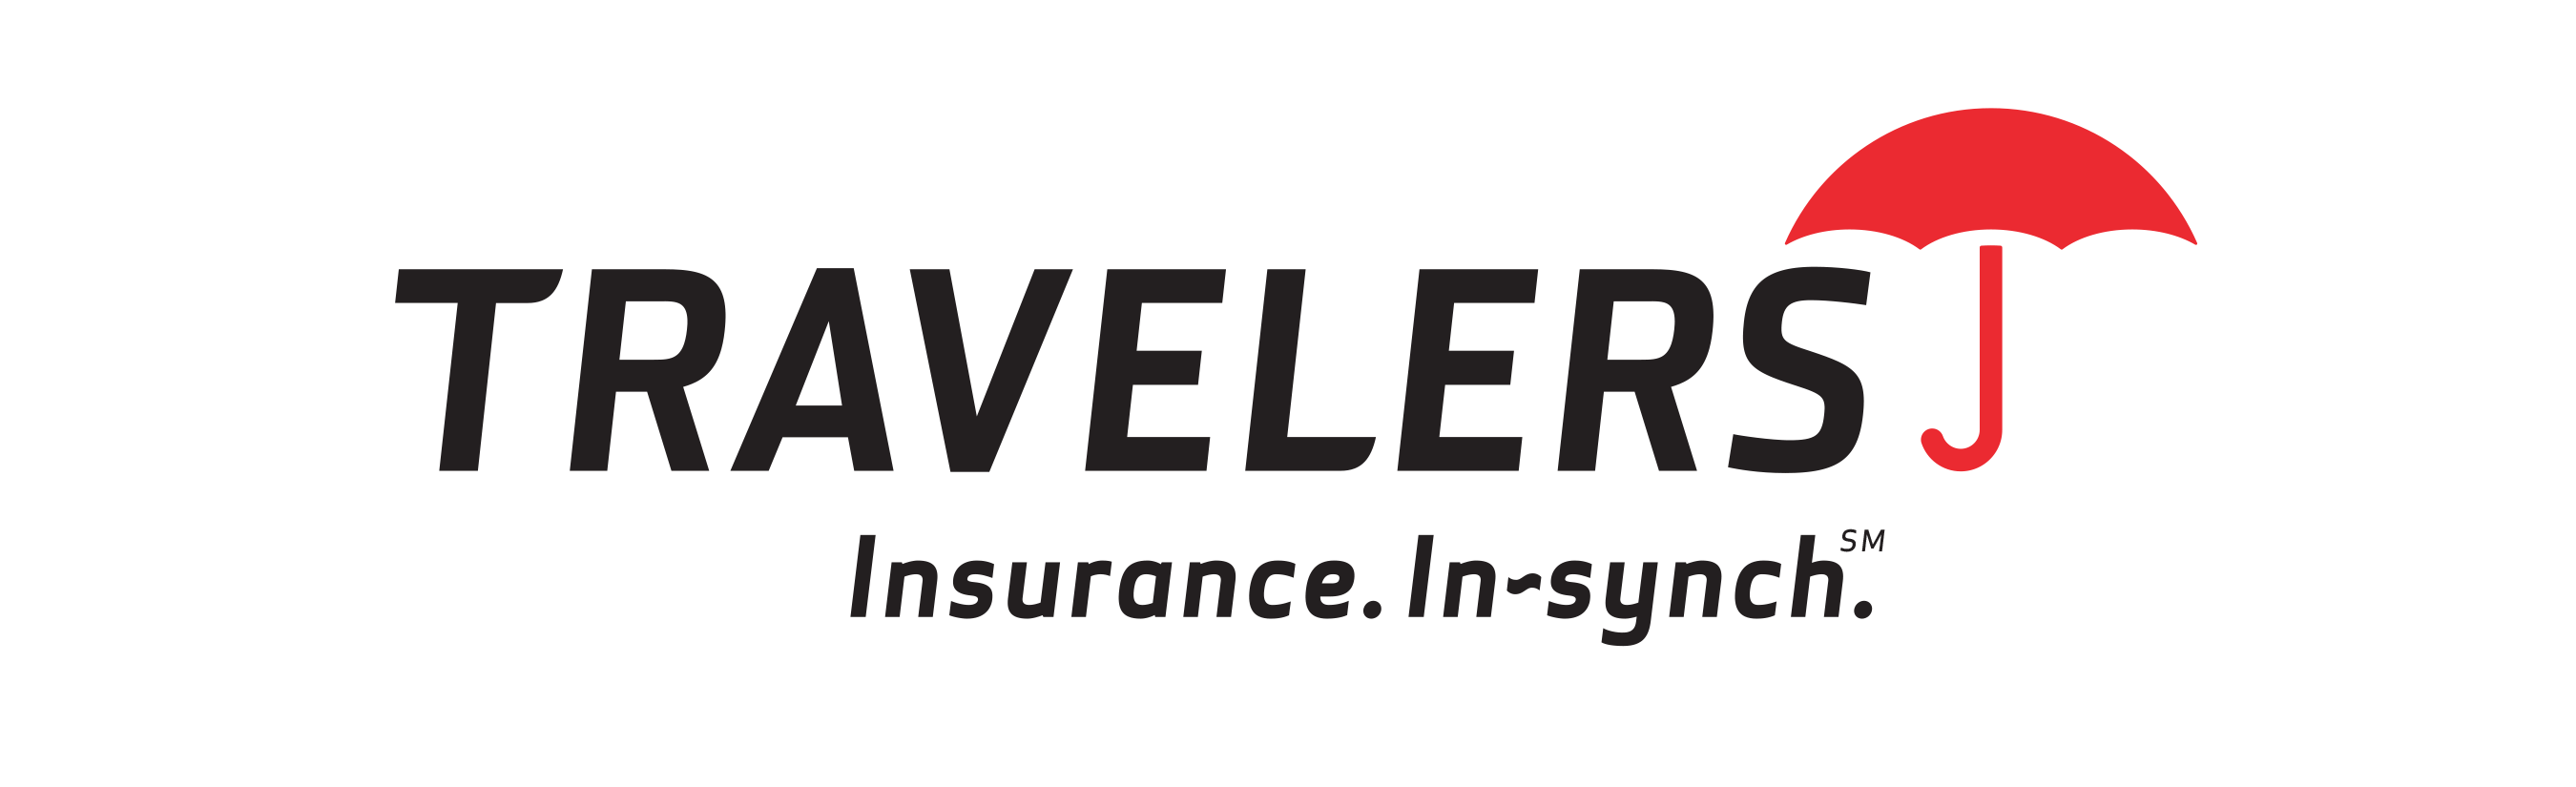 Travelers Insurance Quote Get An Online Quote And Compare Rates.